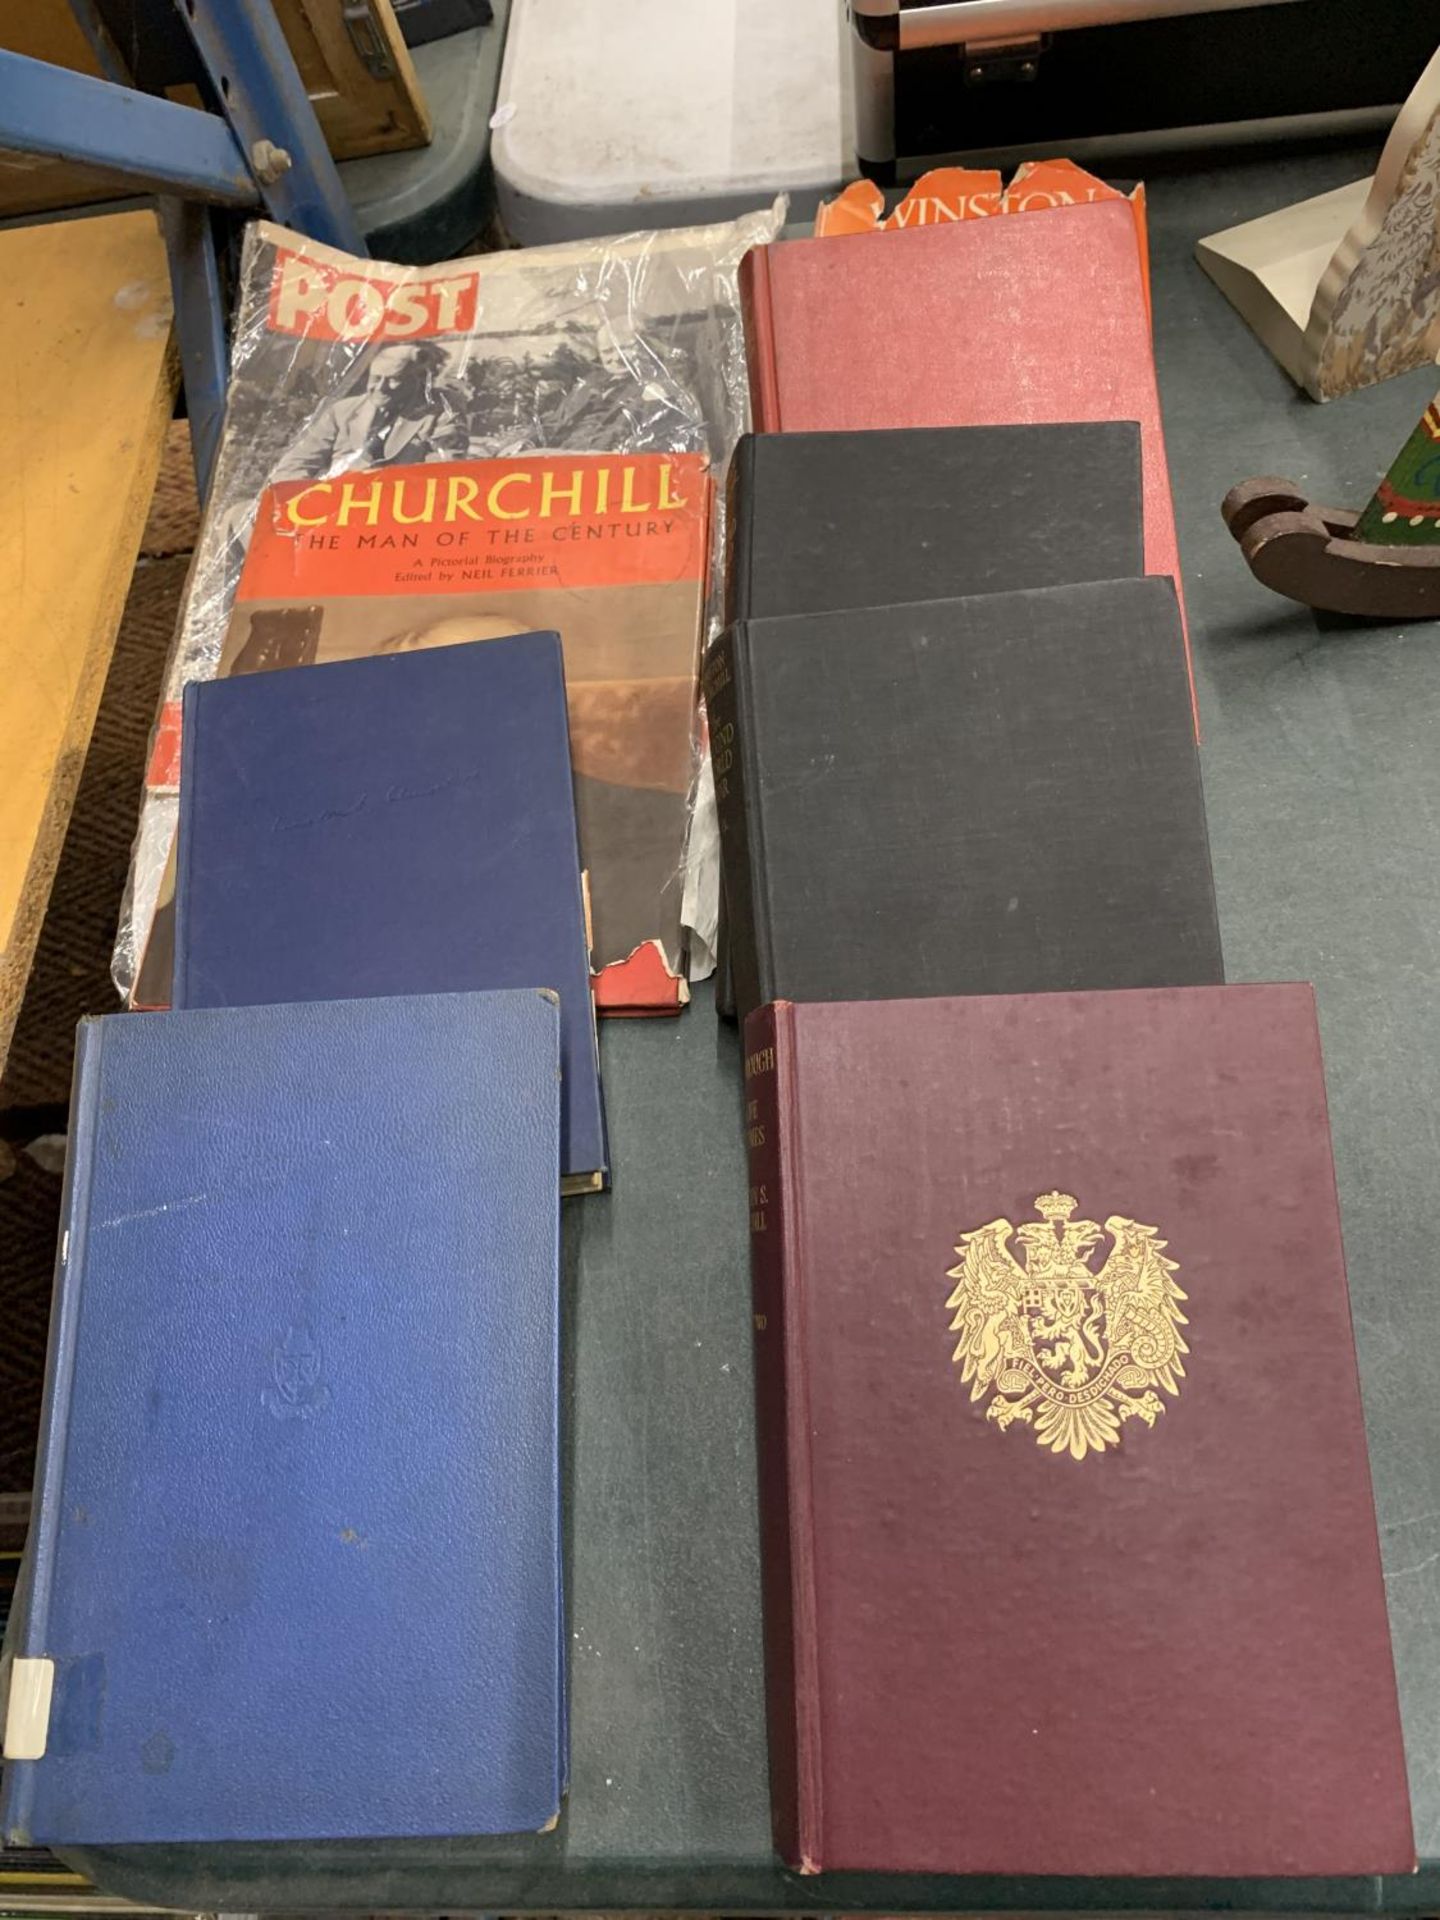 A COLLECTION OF WINSTON CHURCHILL BOOKS TO INCLUDE 'HIS LIFE AND TIMES', 'THE SECOND WORLD WAR'